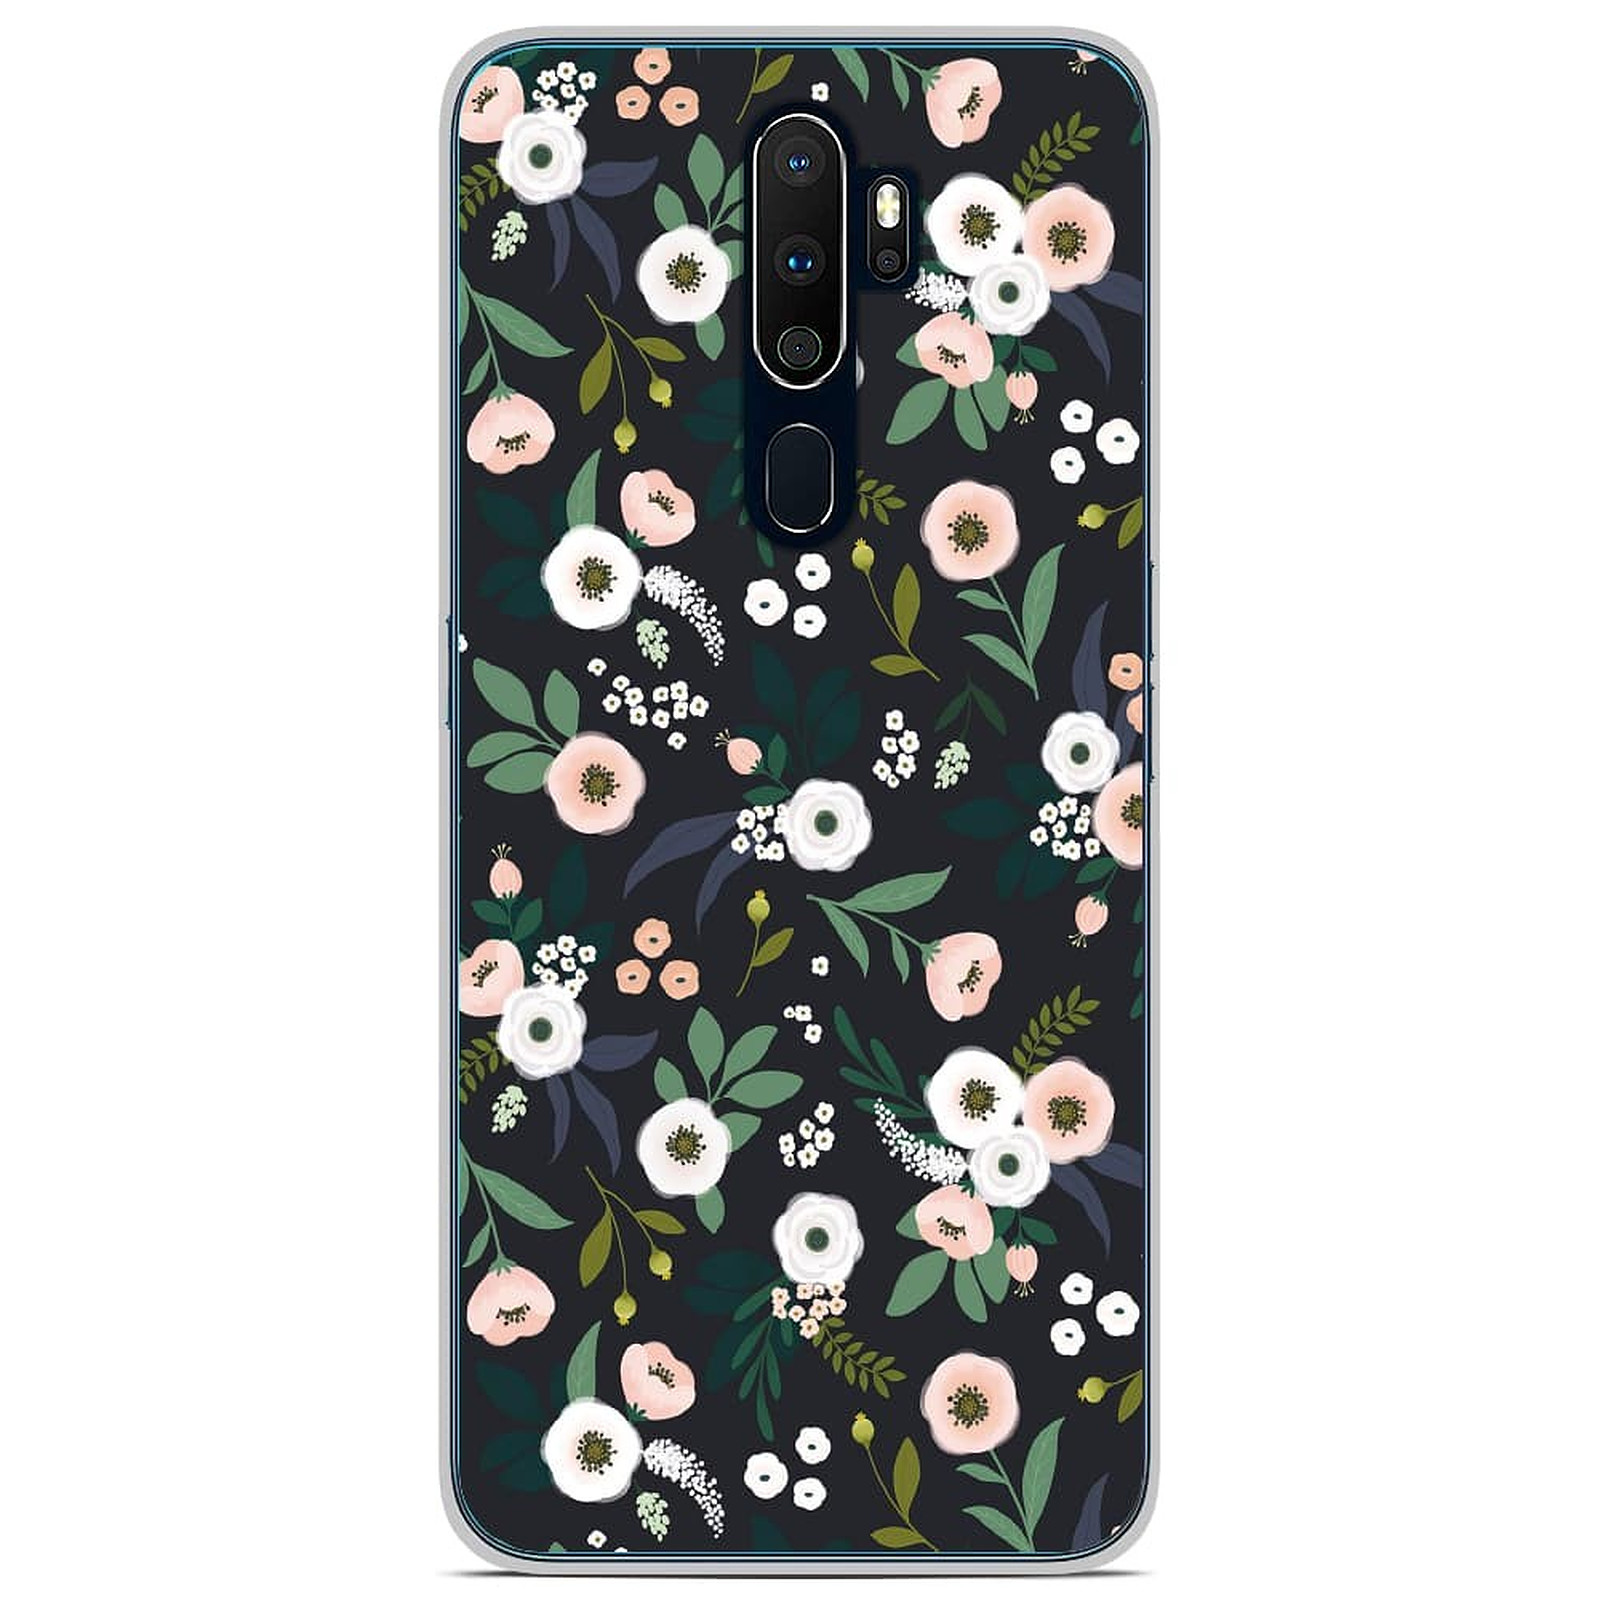 1001 Coques Coque silicone gel Oppo A9 2020 motif Flowers Noir - Coque telephone 1001Coques